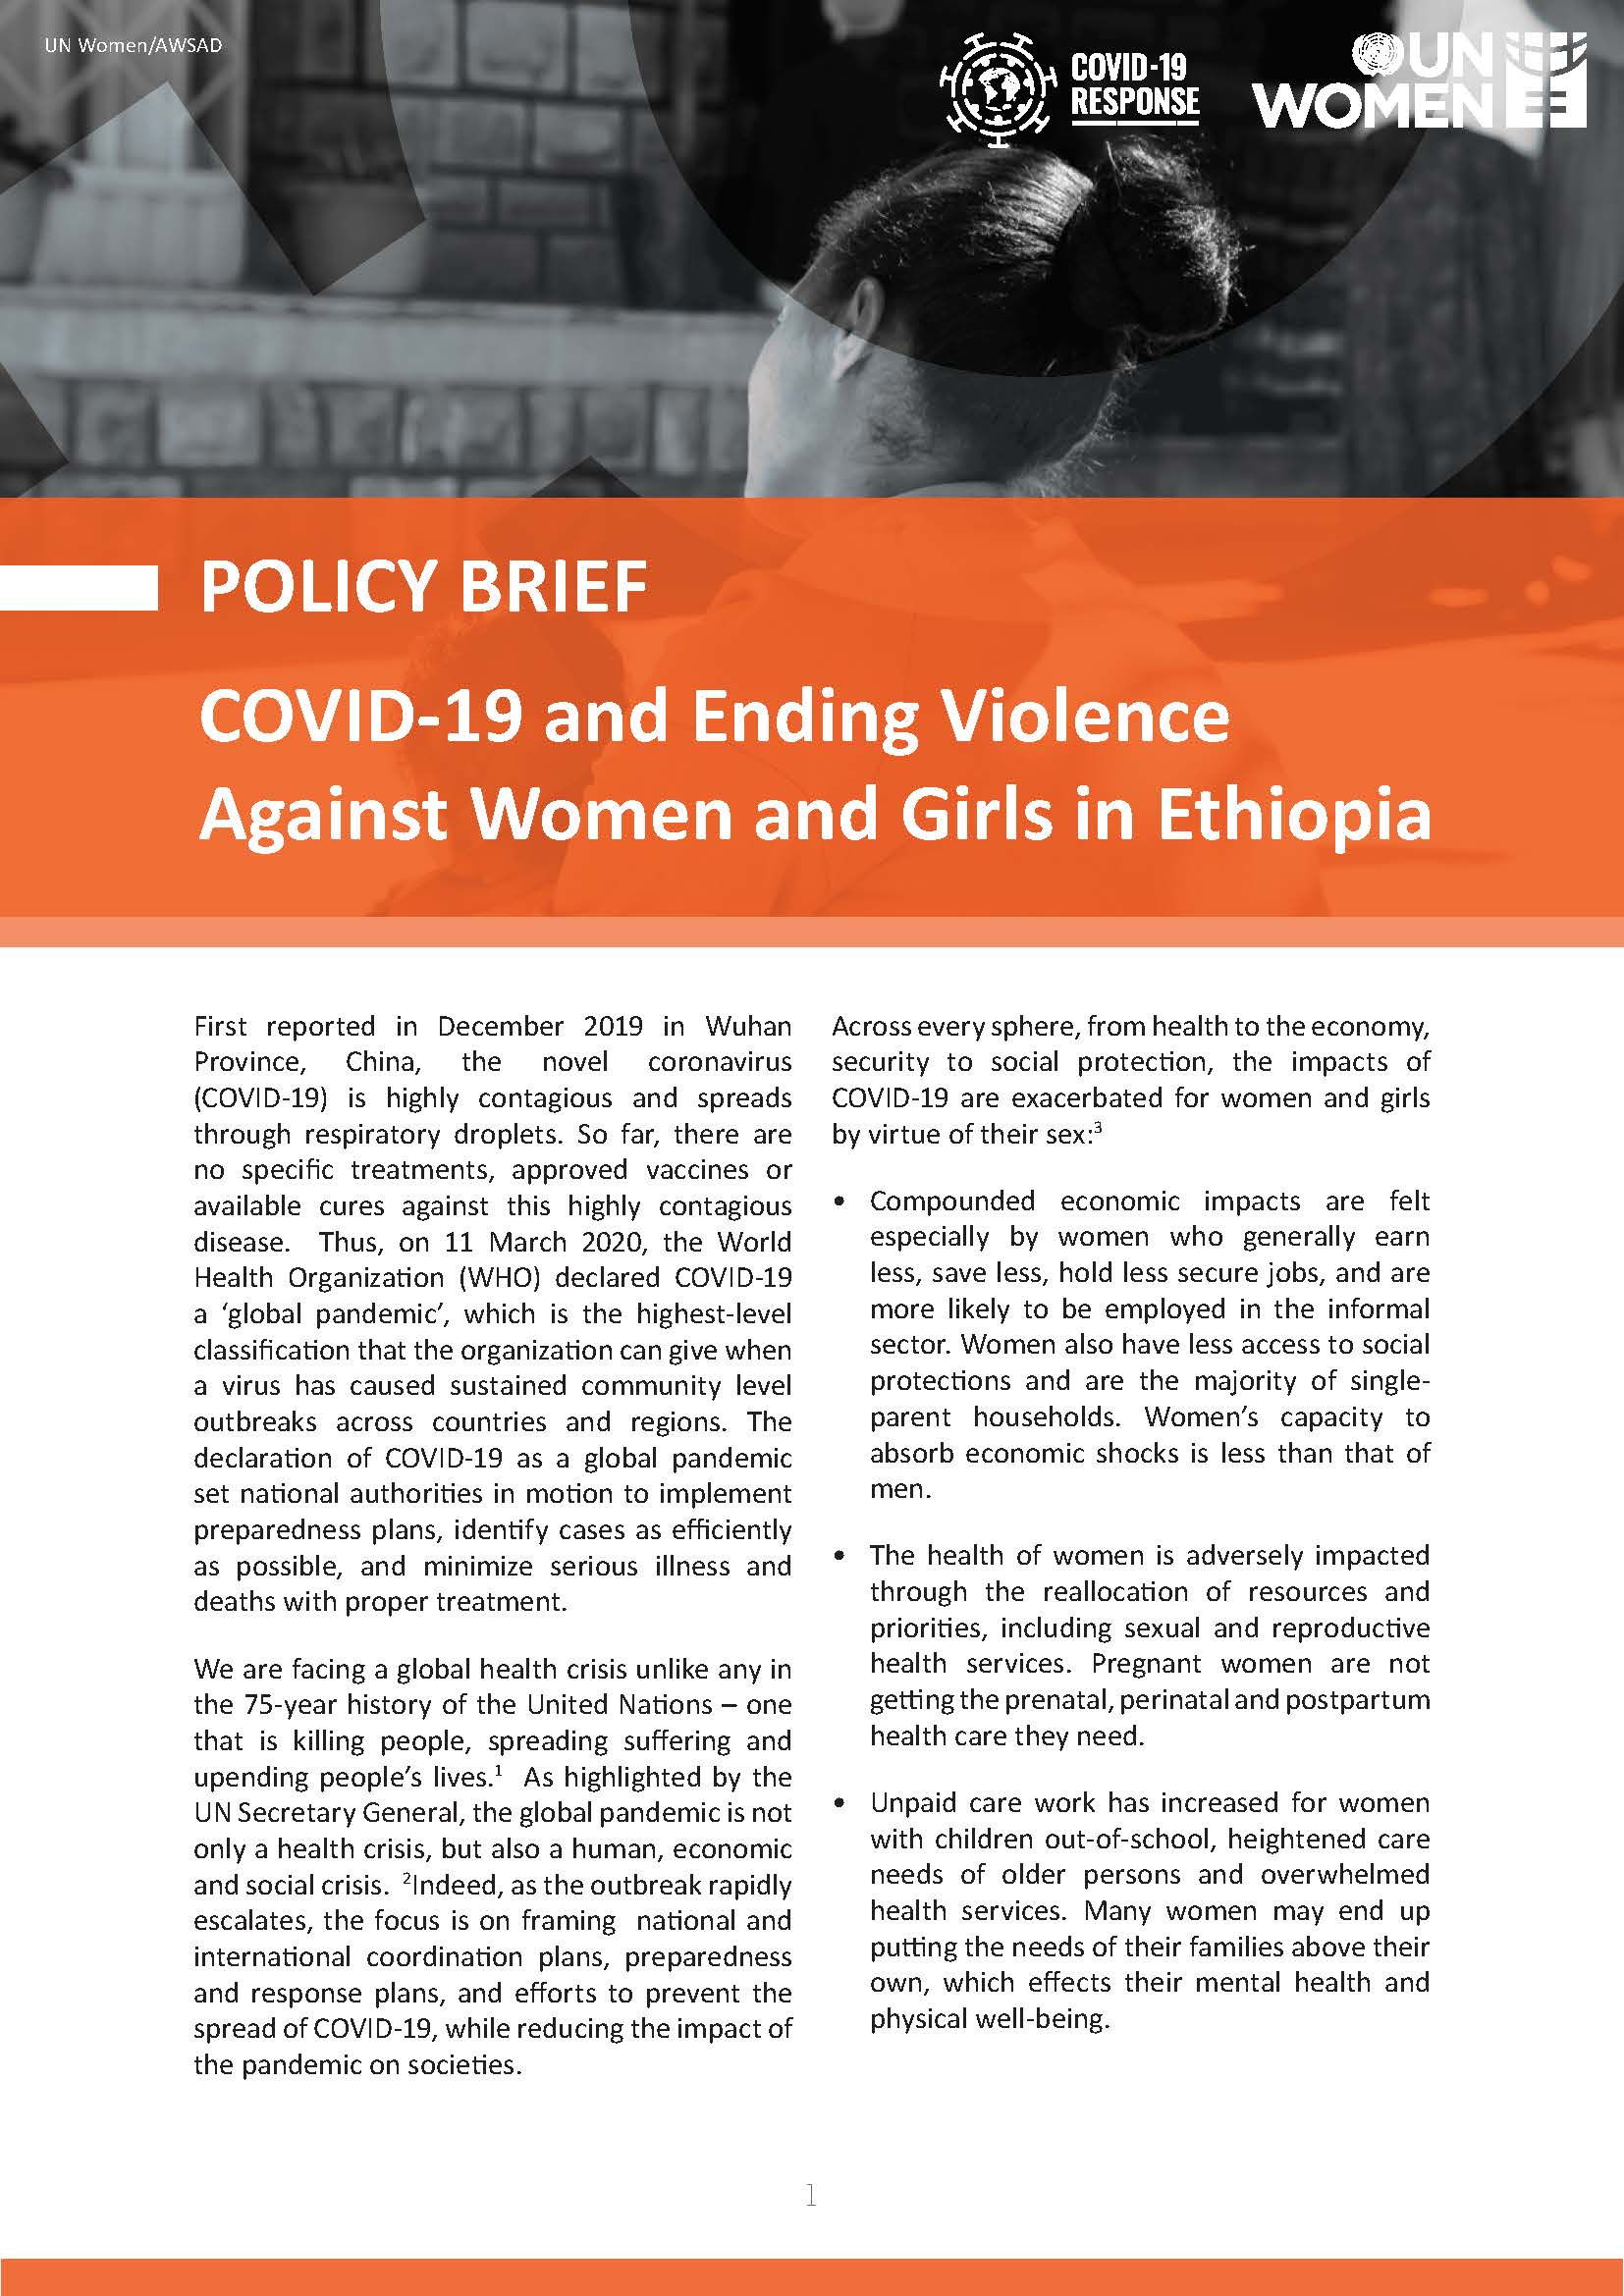 POLICY BRIEF: COVID-19 and Ending Violence Against Women and Girls in Ethiopia